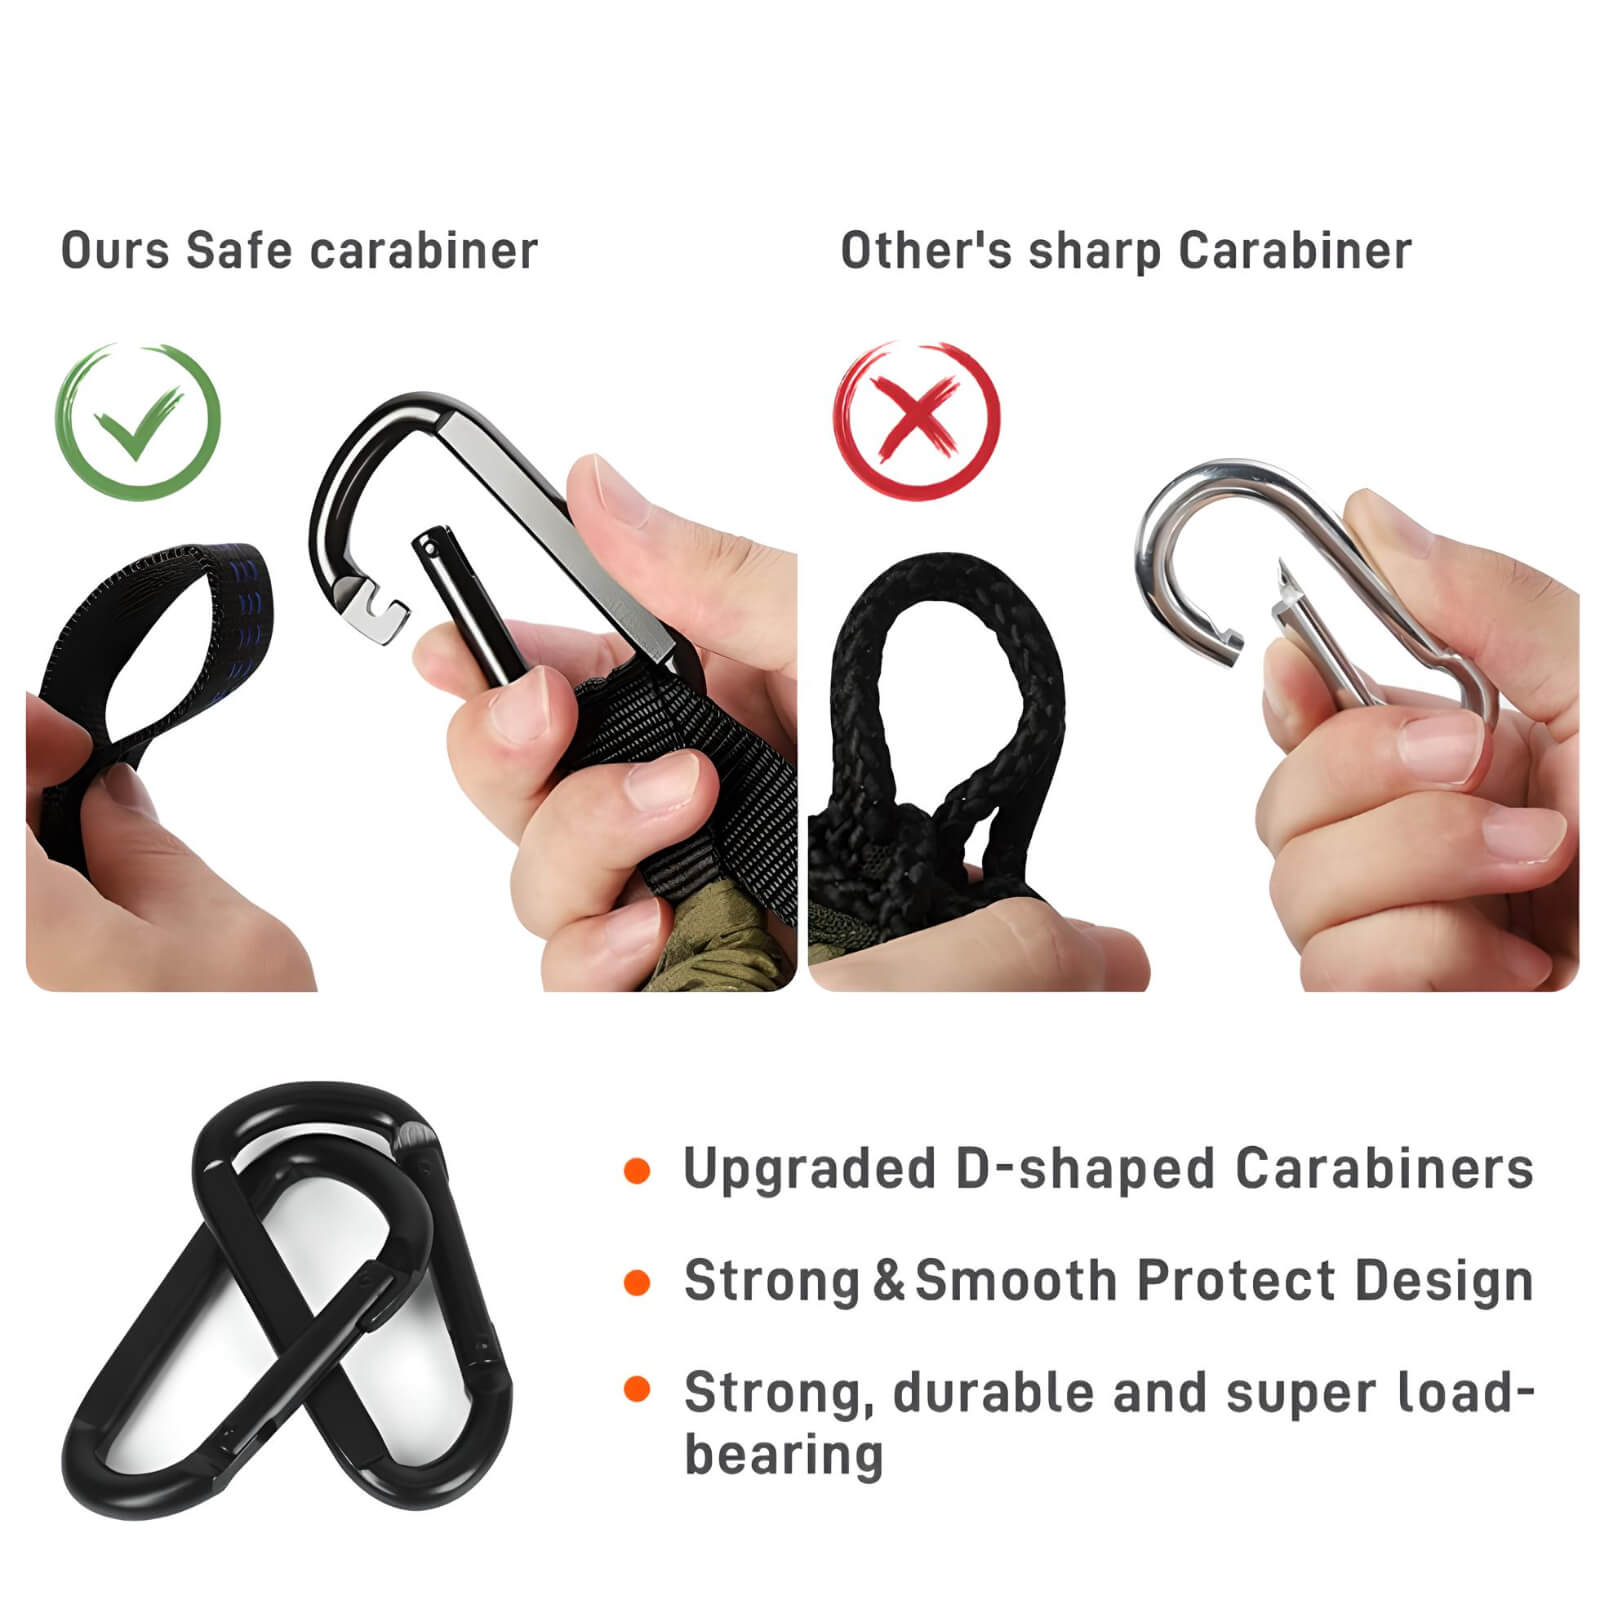 carabiner-differentiation-with-other-carabiner-of-portable-camping-hammock